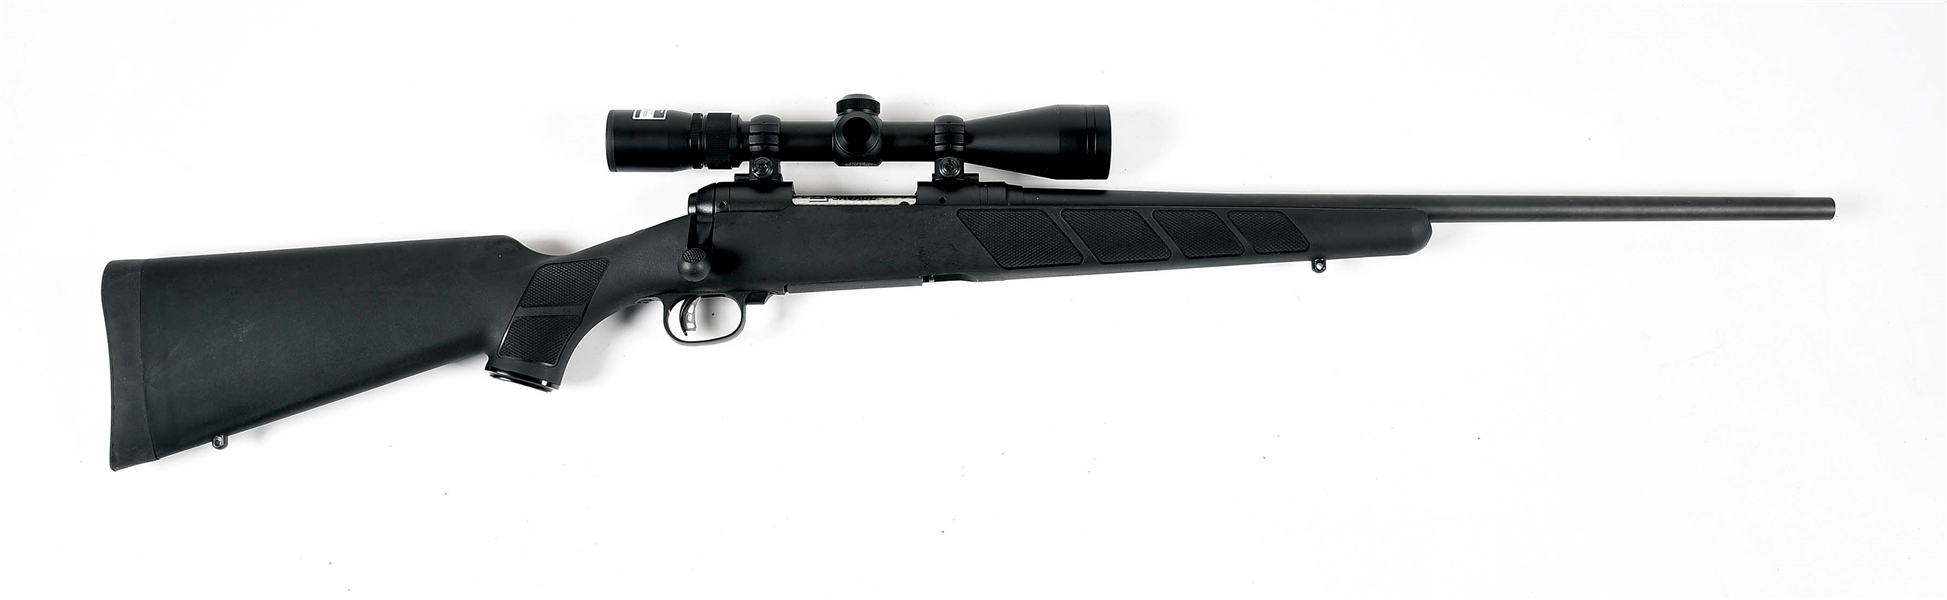 (M) SAVAGE MODEL 11 BOLT ACTION RIFLE IN .260 REMINGTON. 